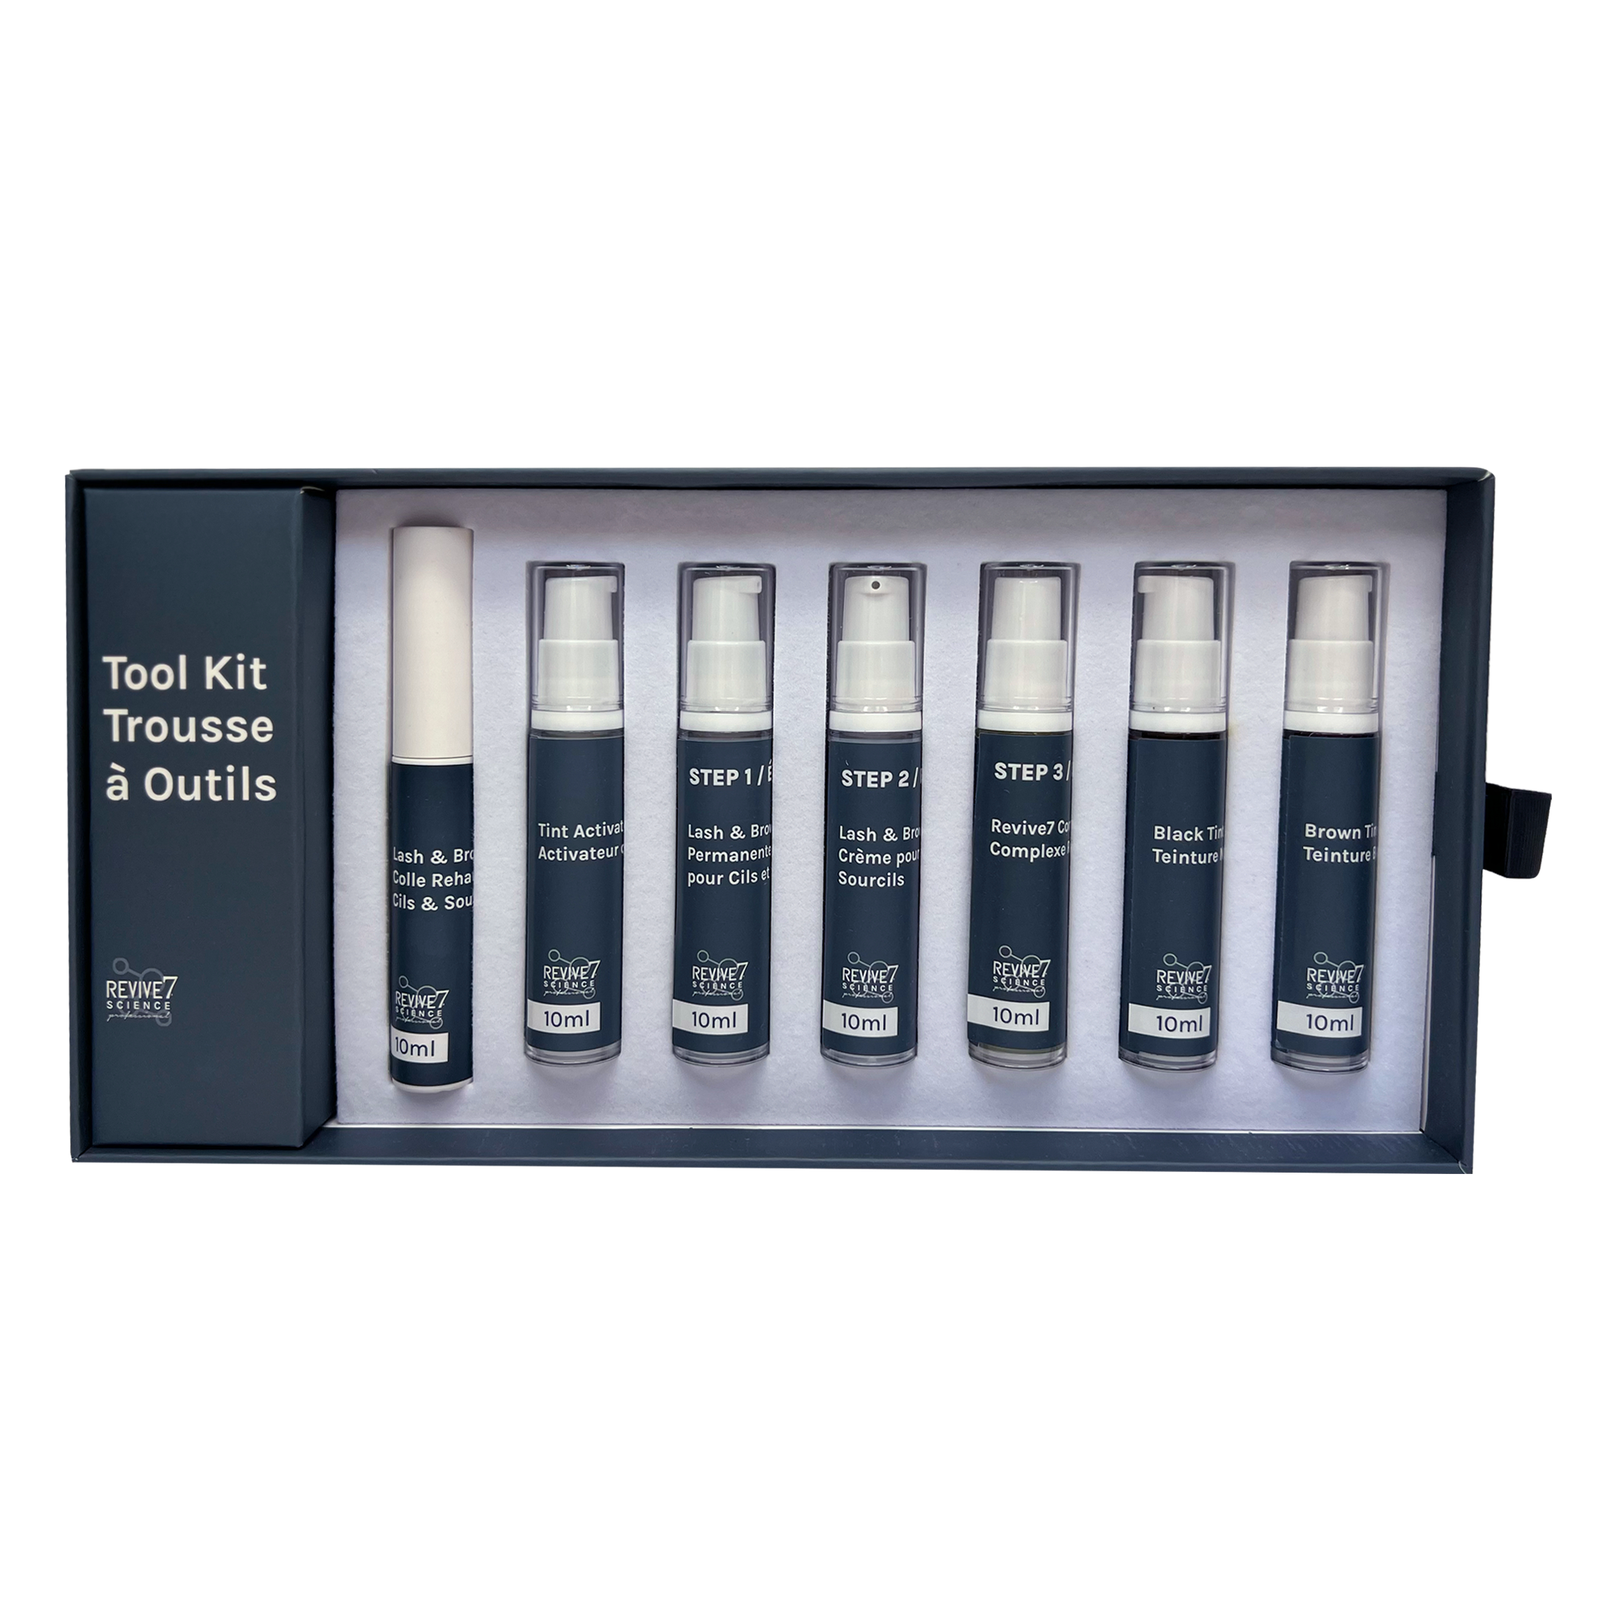 Revive7 Professional 4-in-1 Kit: Lash Lift, Brow Lamination, Tint, & Revive open package